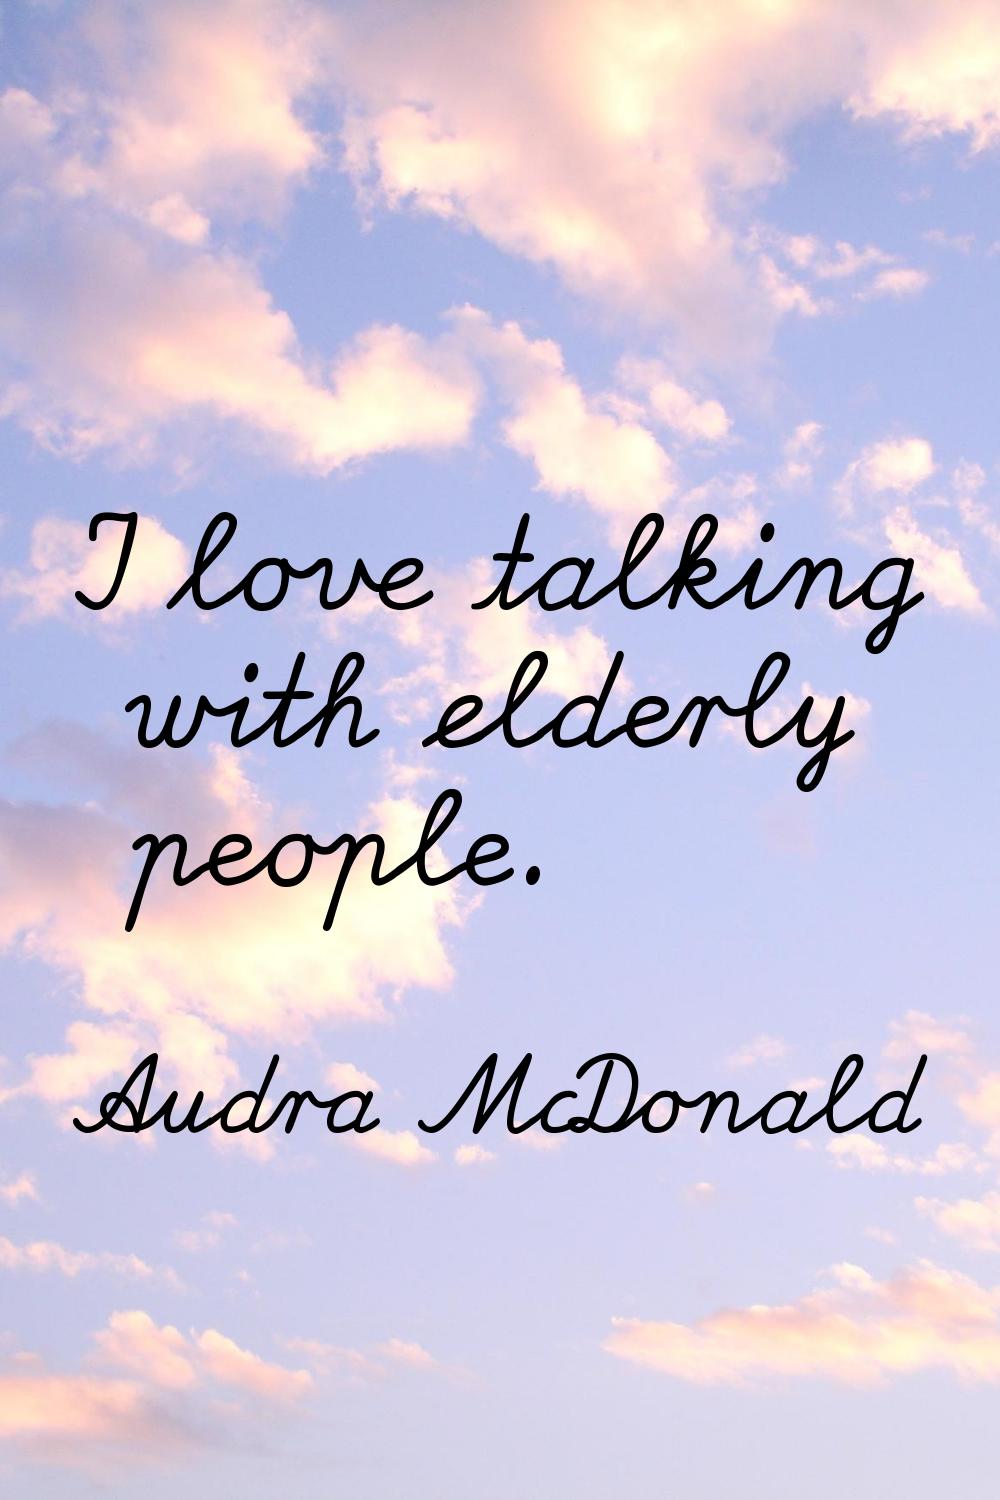 I love talking with elderly people.